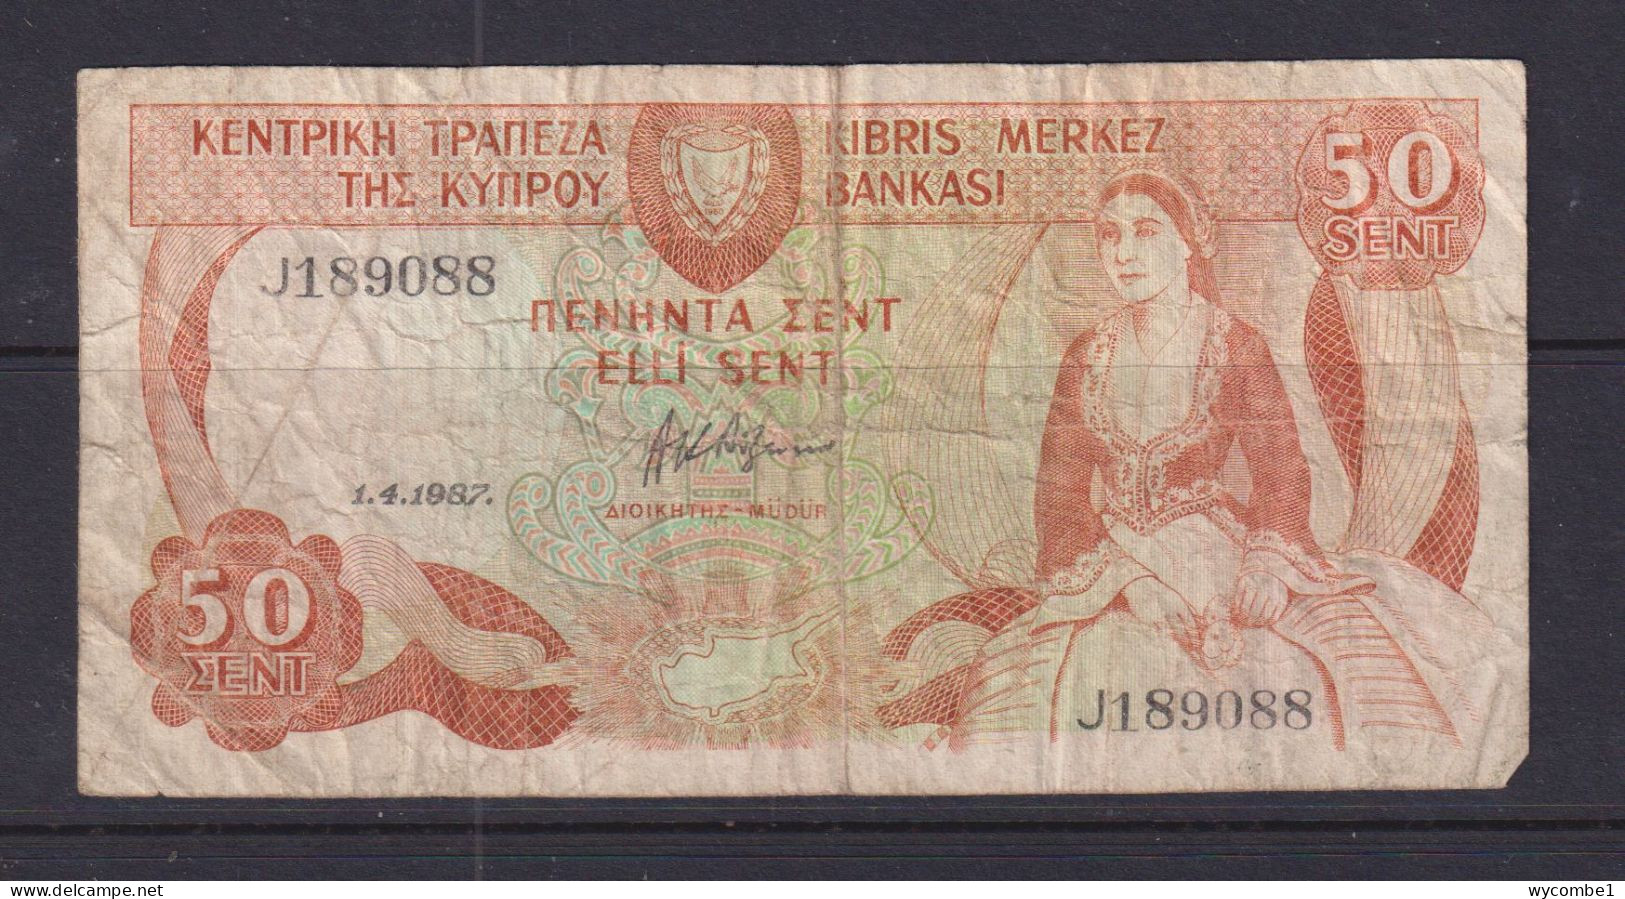 CYPRUS- 1987 50 Sent Circulated Banknote As Scans - Cyprus